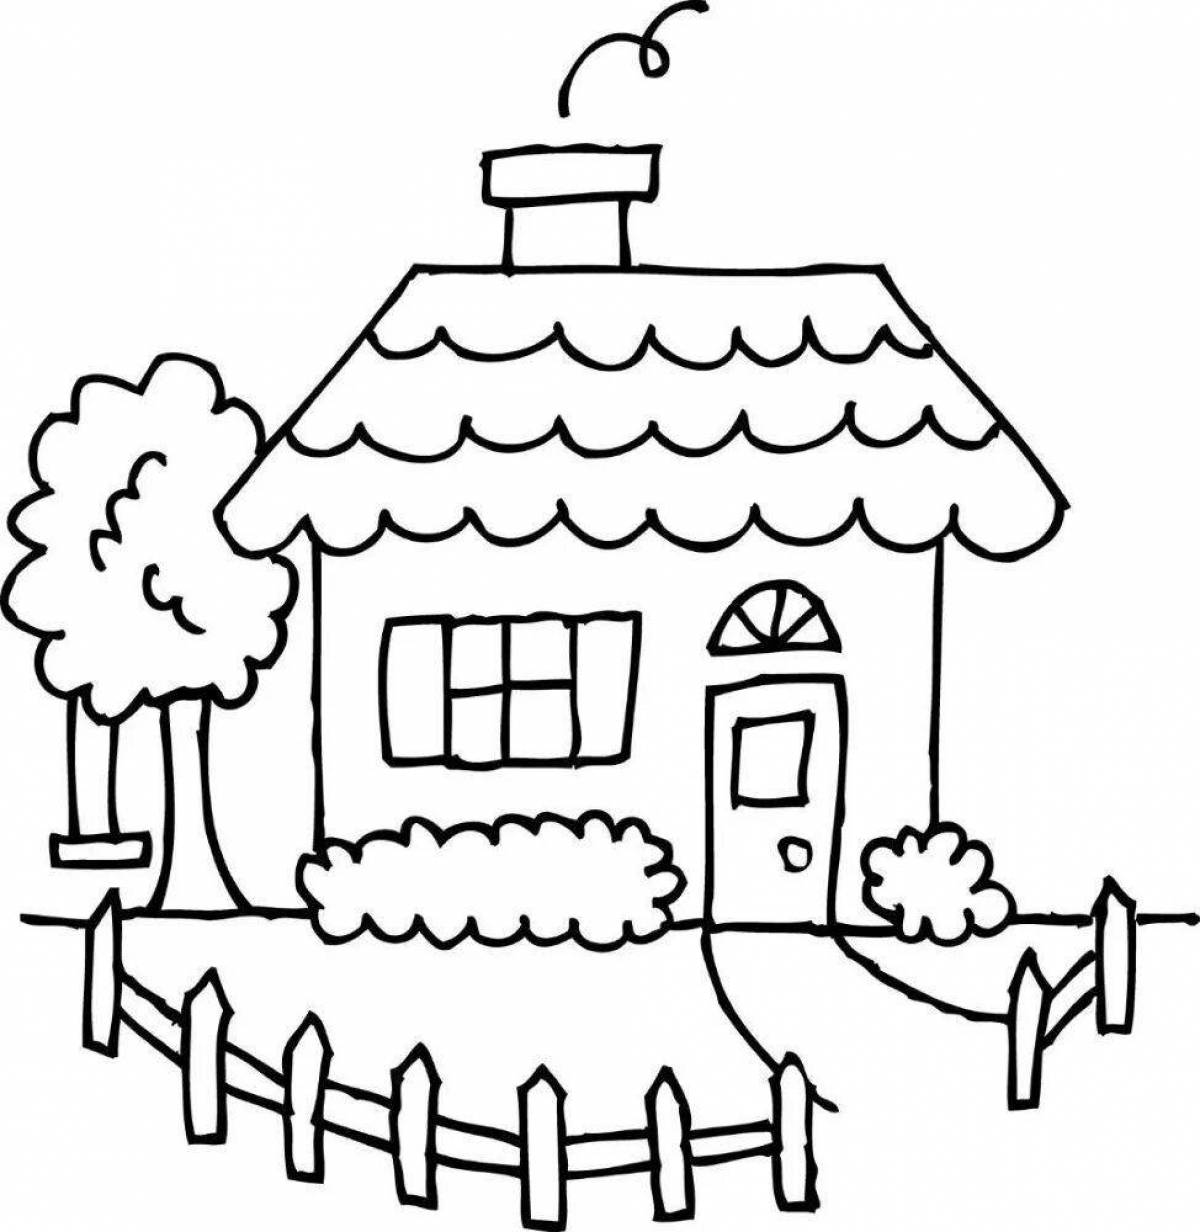 Amazing house coloring book for kids 2-3 years old